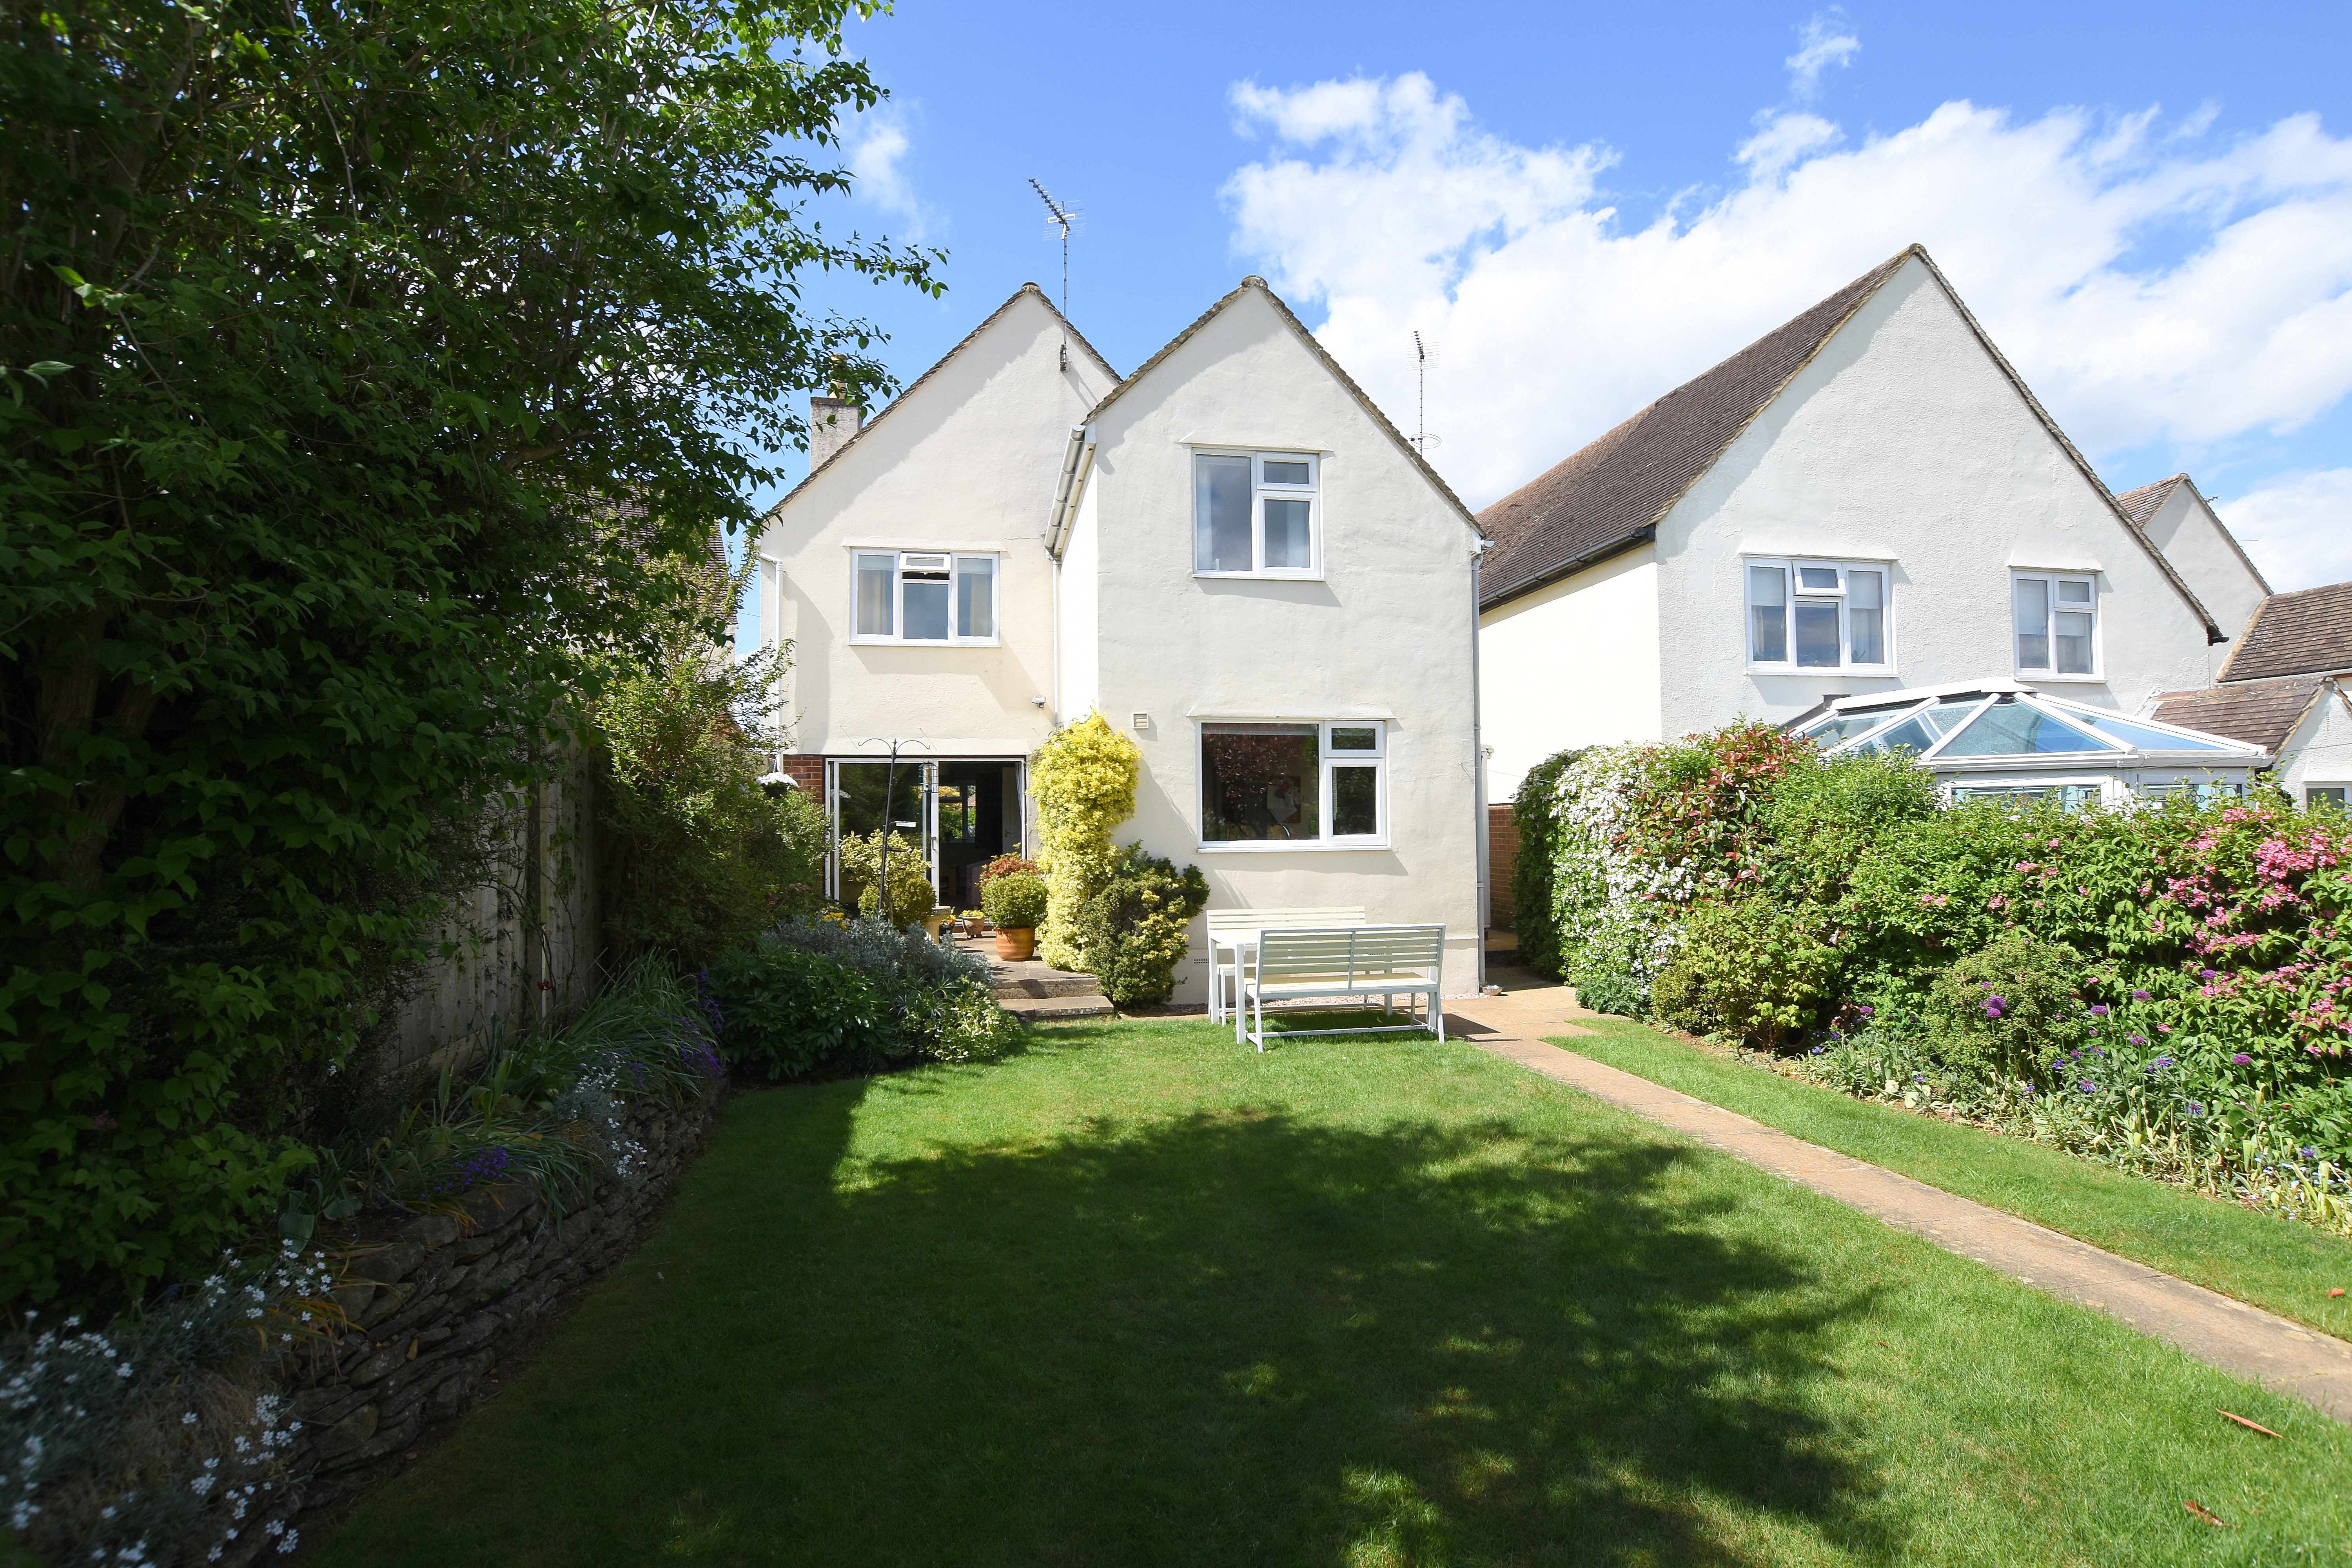 4 bed  for sale in Church View, Banbury  - Property Image 1